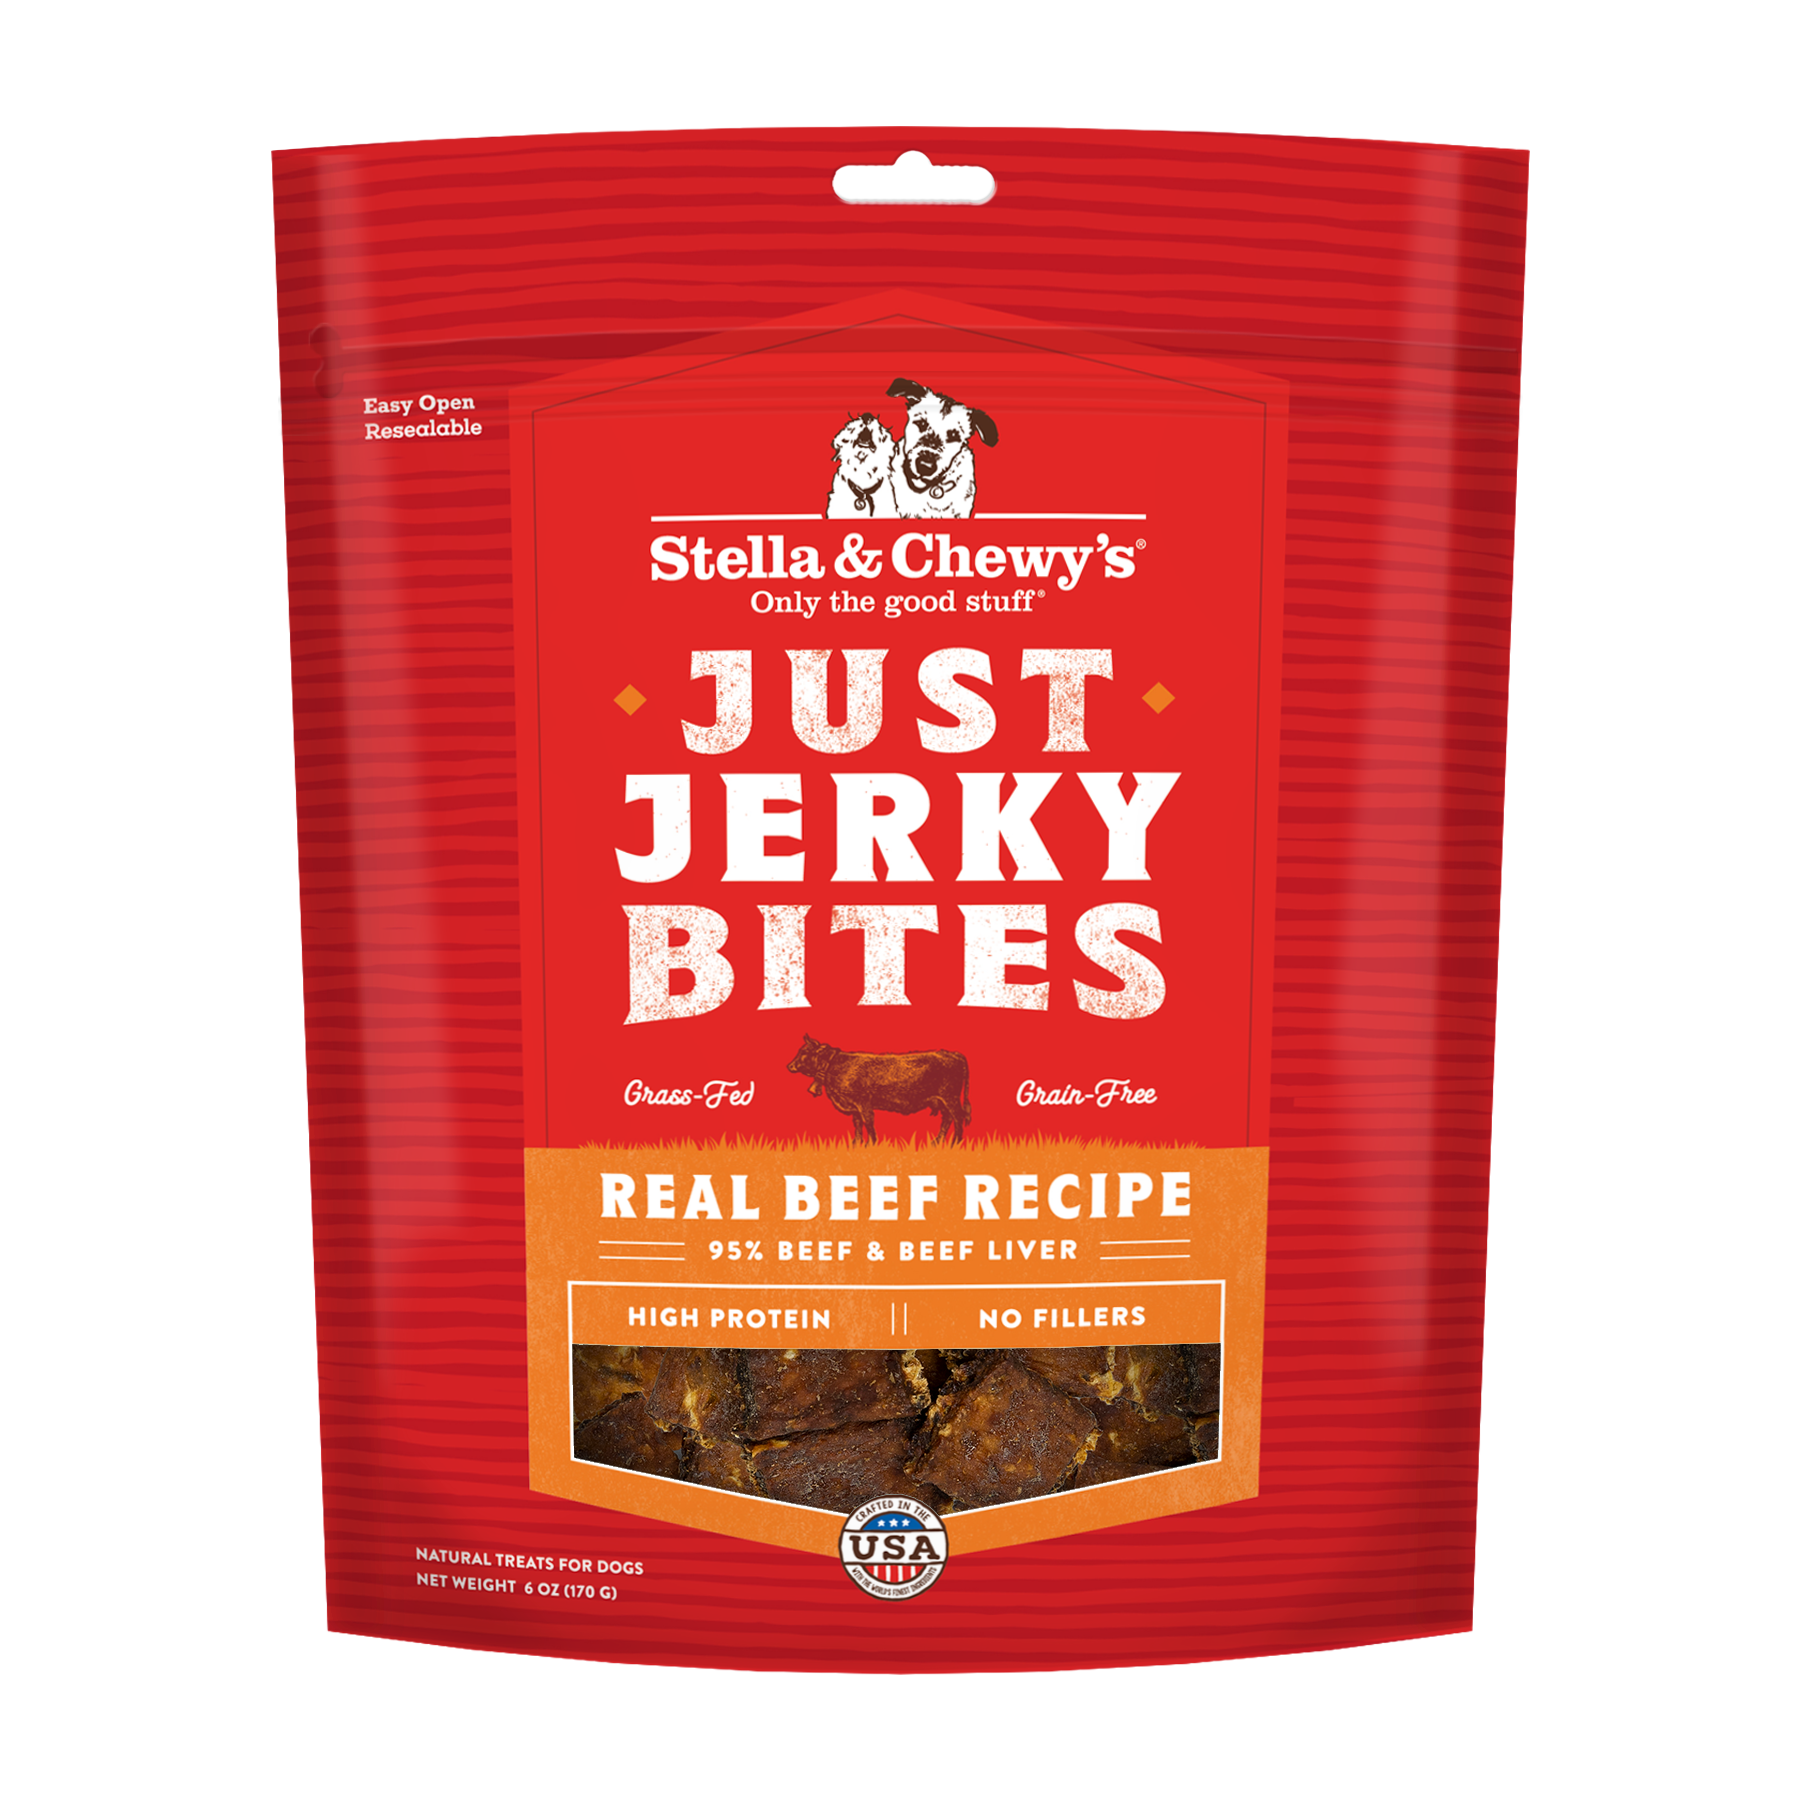 Stella & Chewy's Just Jerky Bites